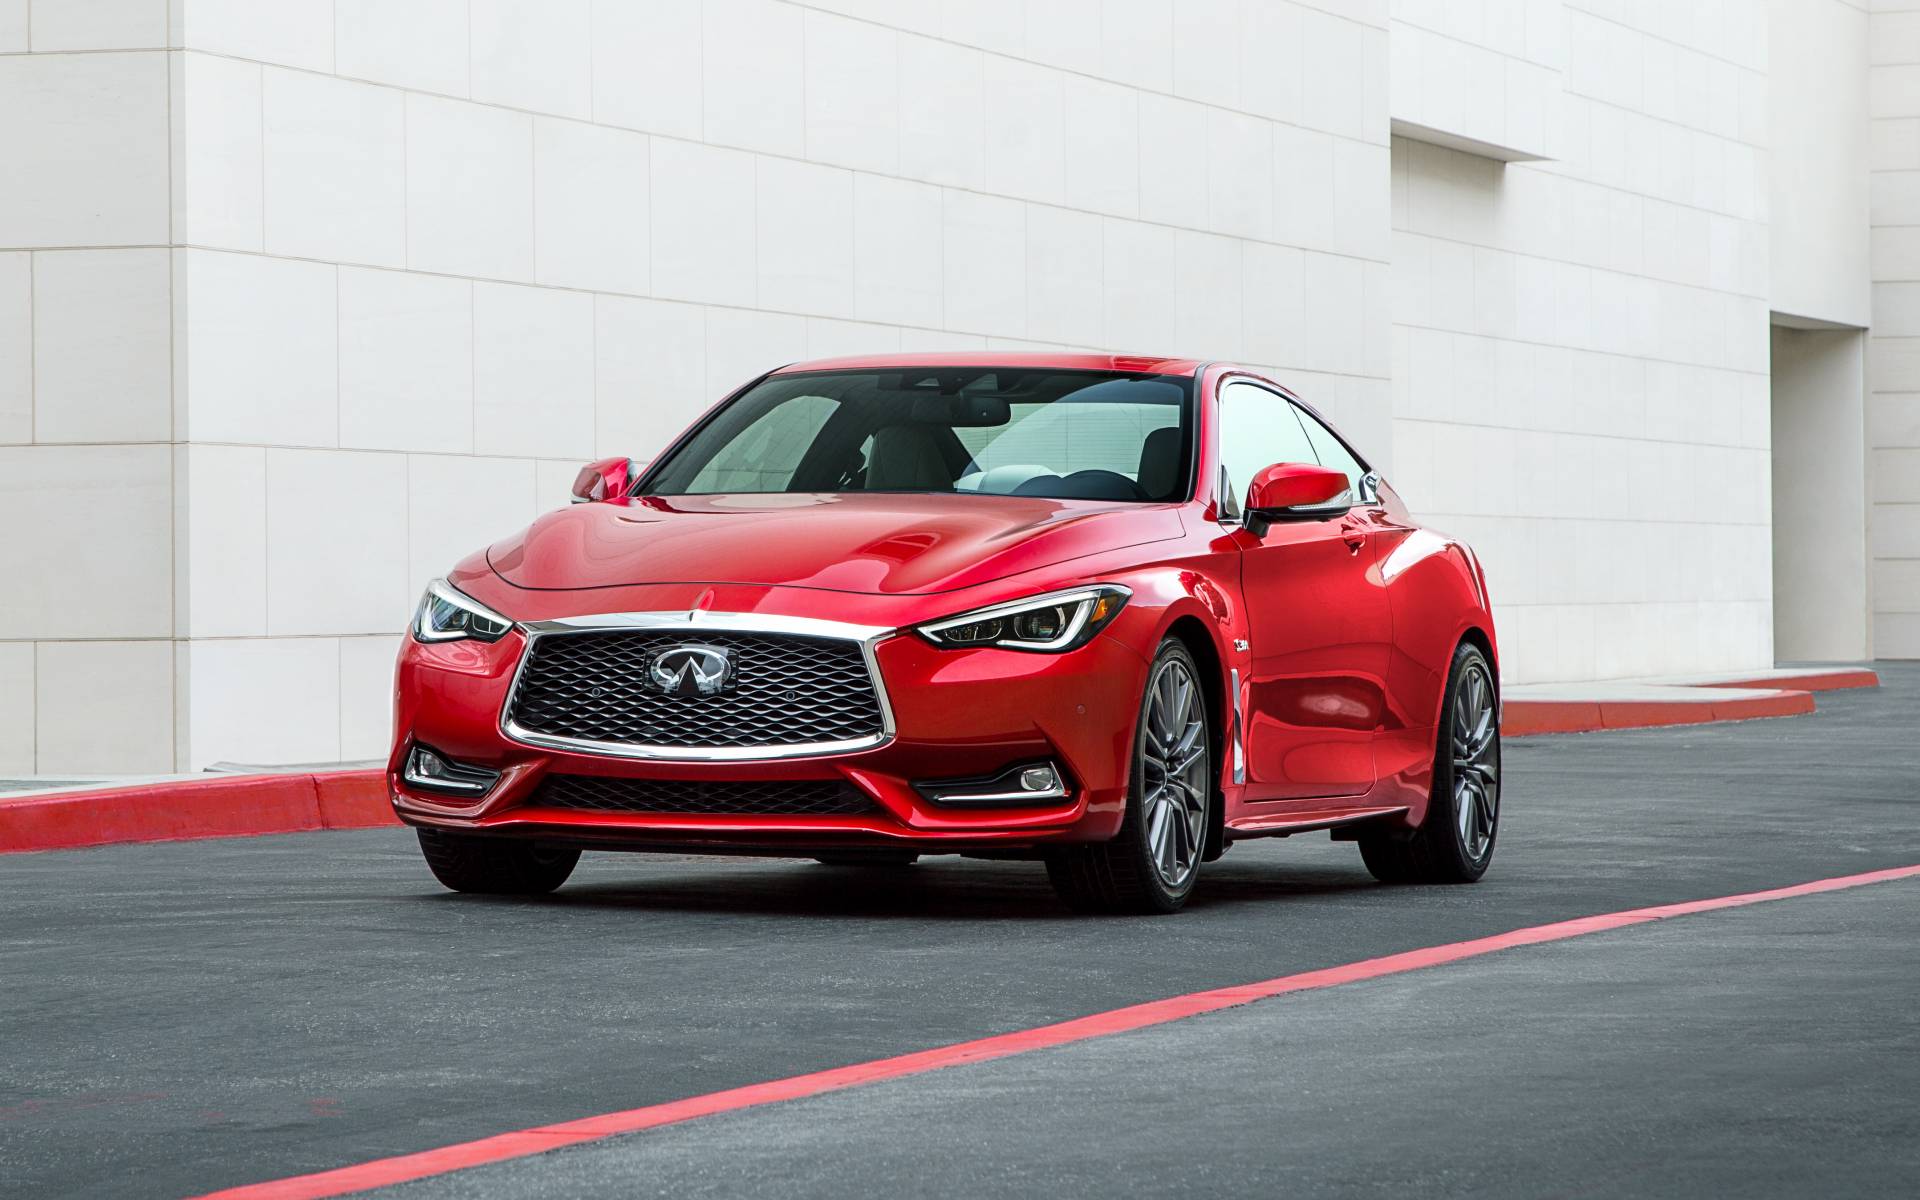 2019 Infiniti Q60 3.0t LUXE AWD Price & Specifications The Car Guide